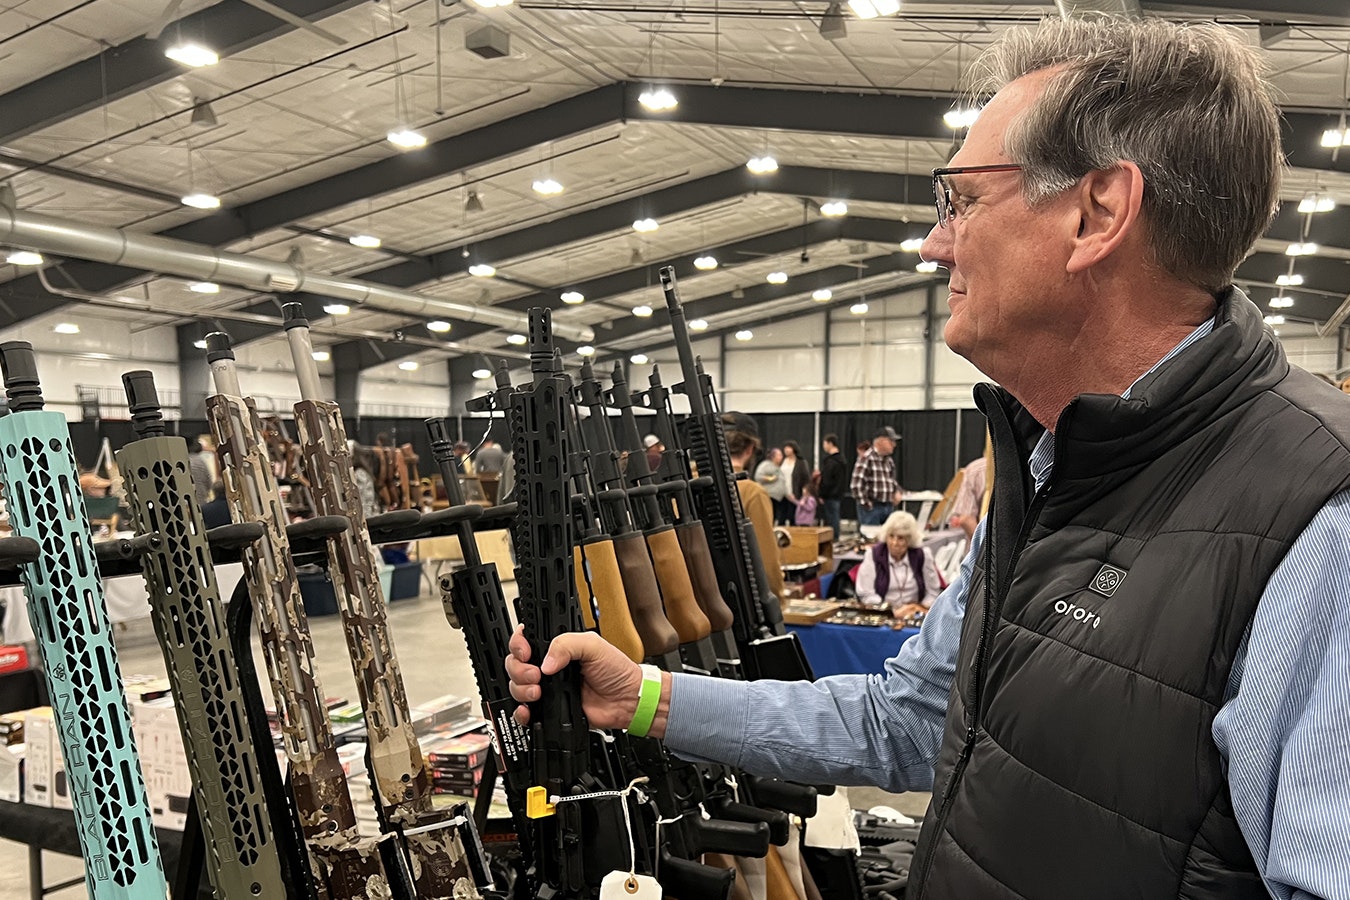 Dean Brantly of Georgia checks out his “dream gun,” a Daniel Defense AR-10 chambered in 7.62 x 51 mm NATO at the New Frontier Gun Show and Western Collectibles Show in Cheyenne in this file photo.